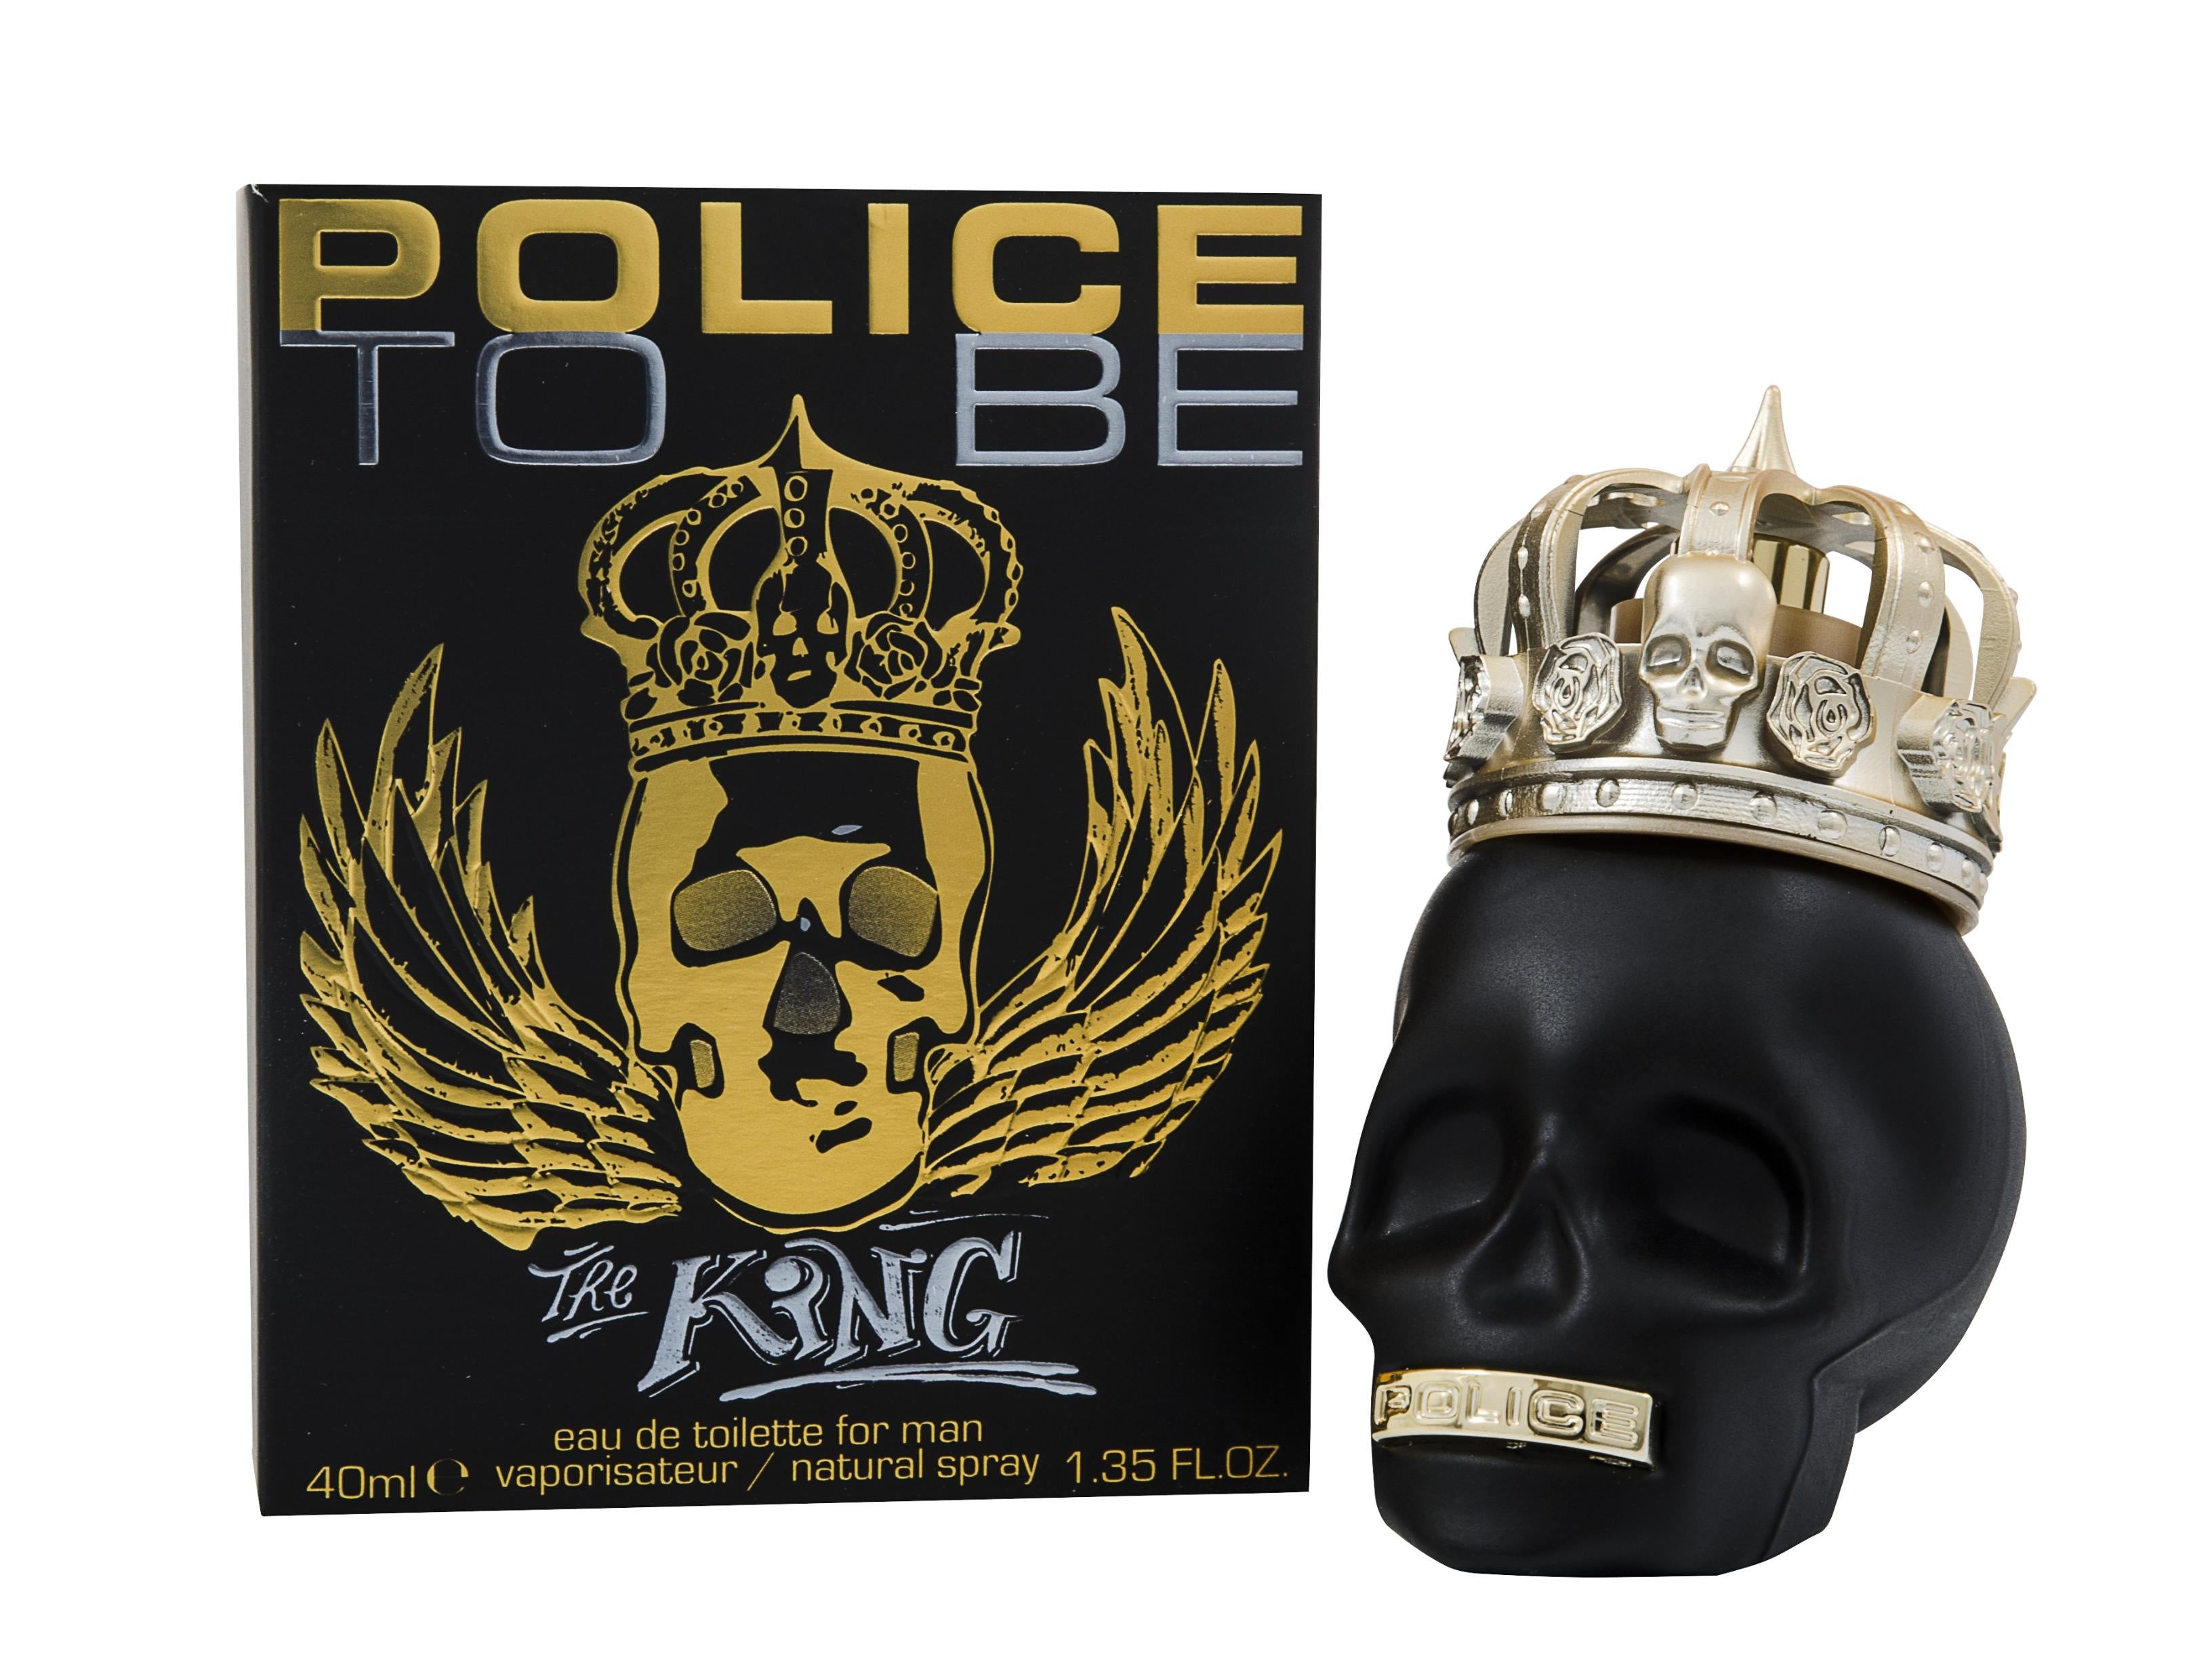 View Police To Be The King Eau de Toilette 40ml Spray information